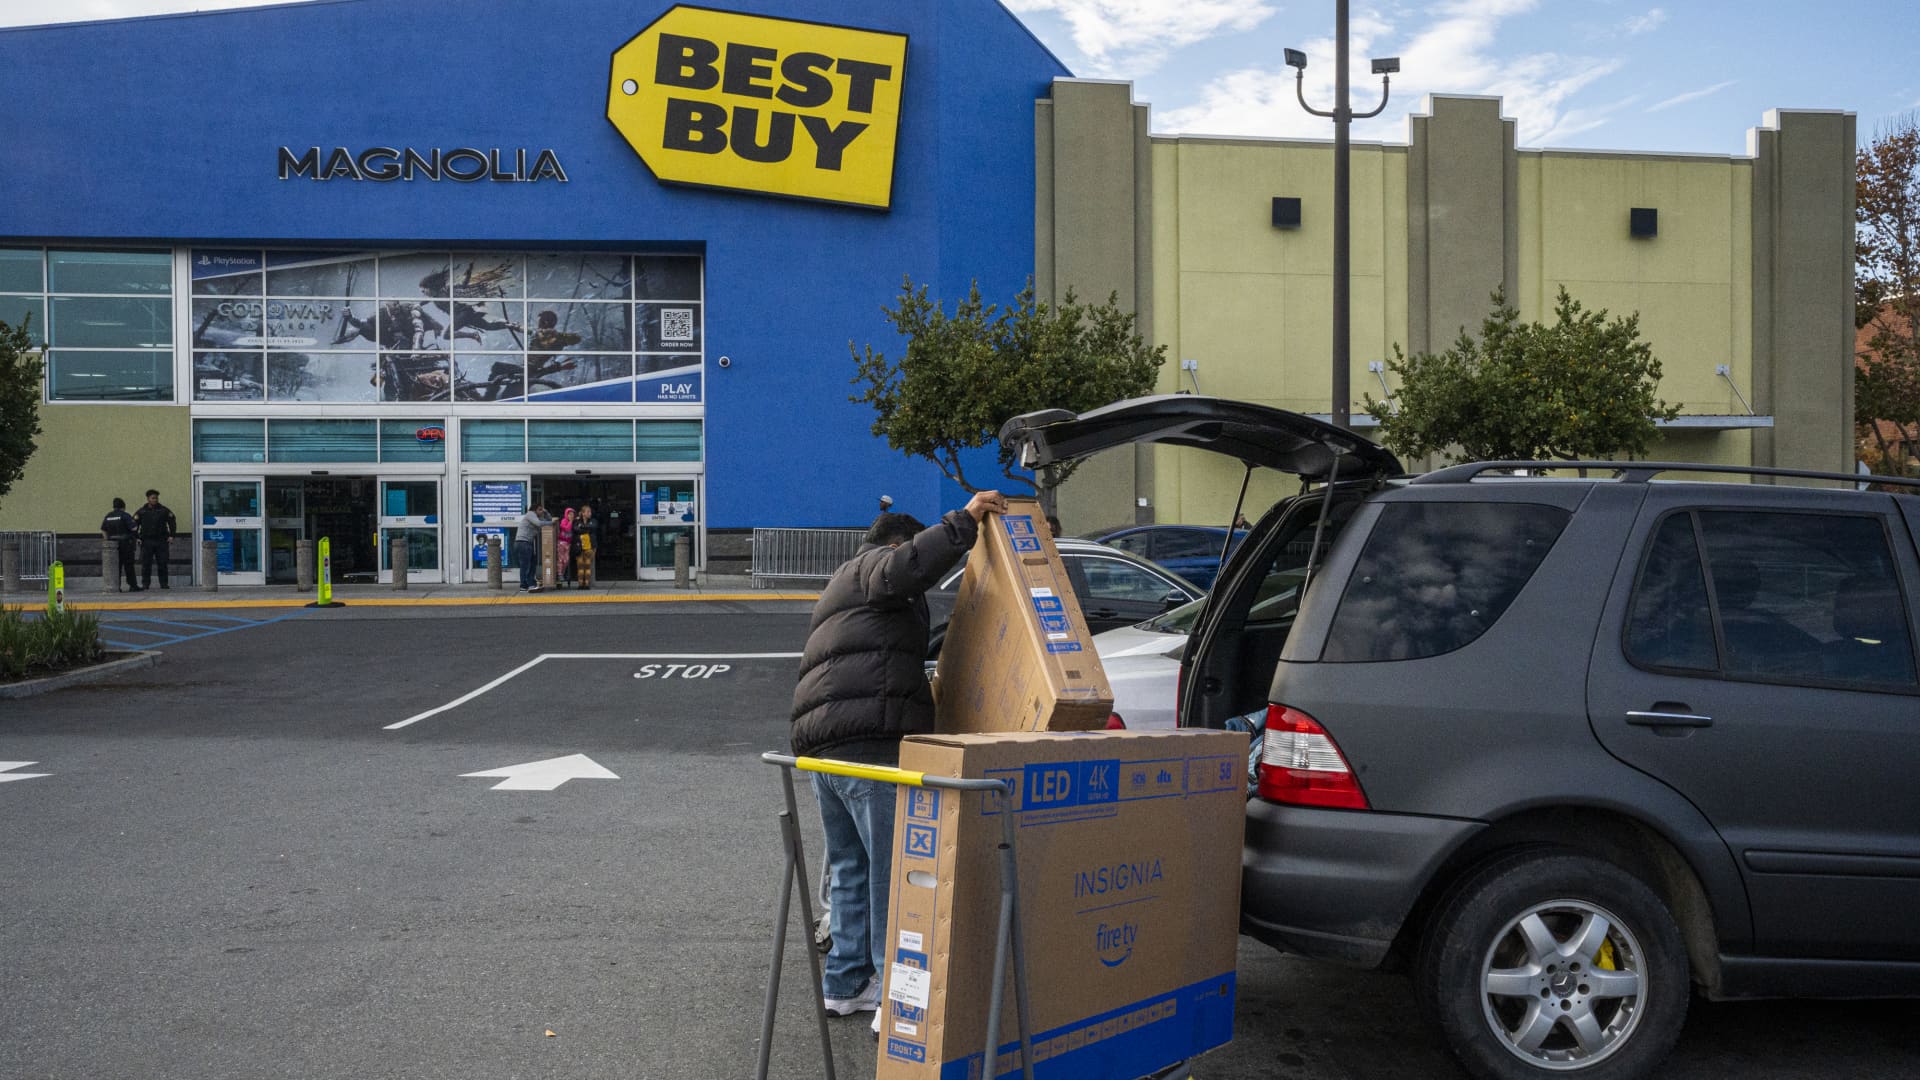 Stocks making the biggest moves midday: Best Buy, Big Lots, Coinbase, Nio and more